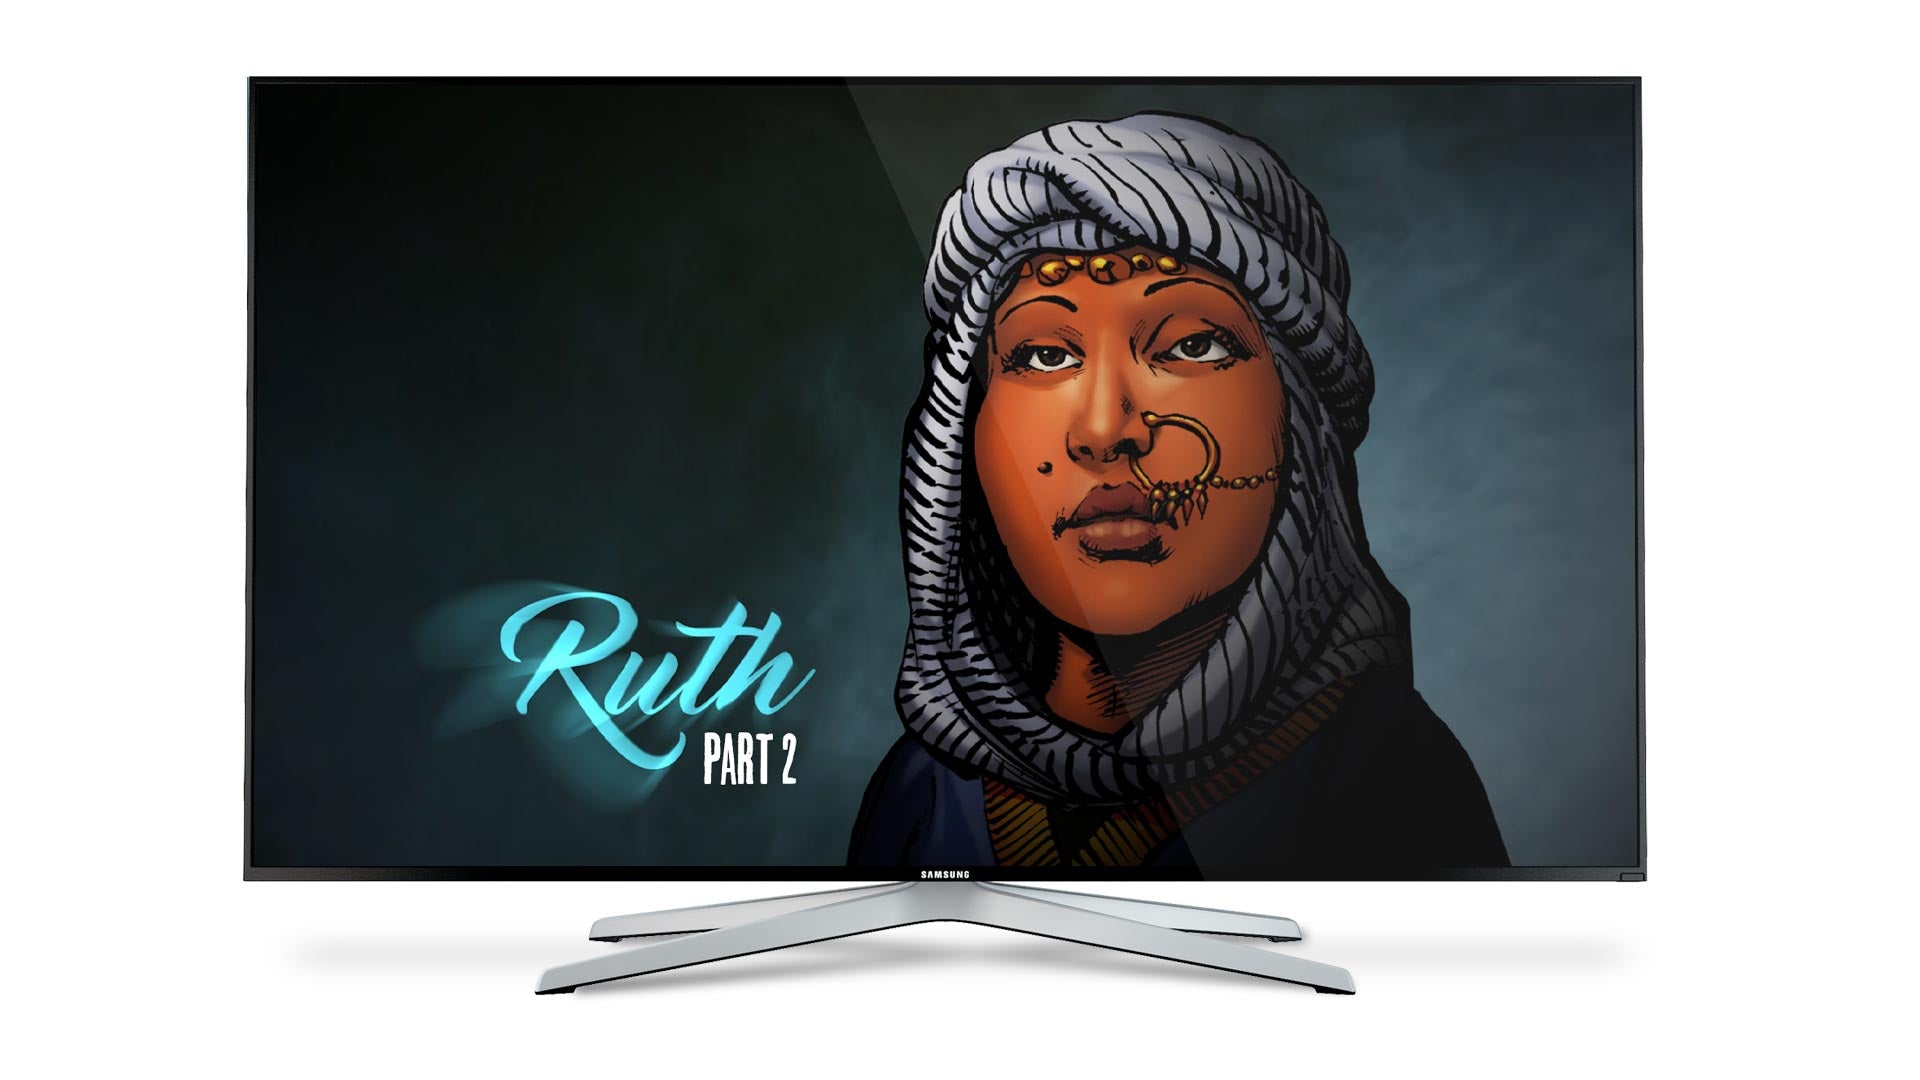 Motion Comic: Ruth Part 2